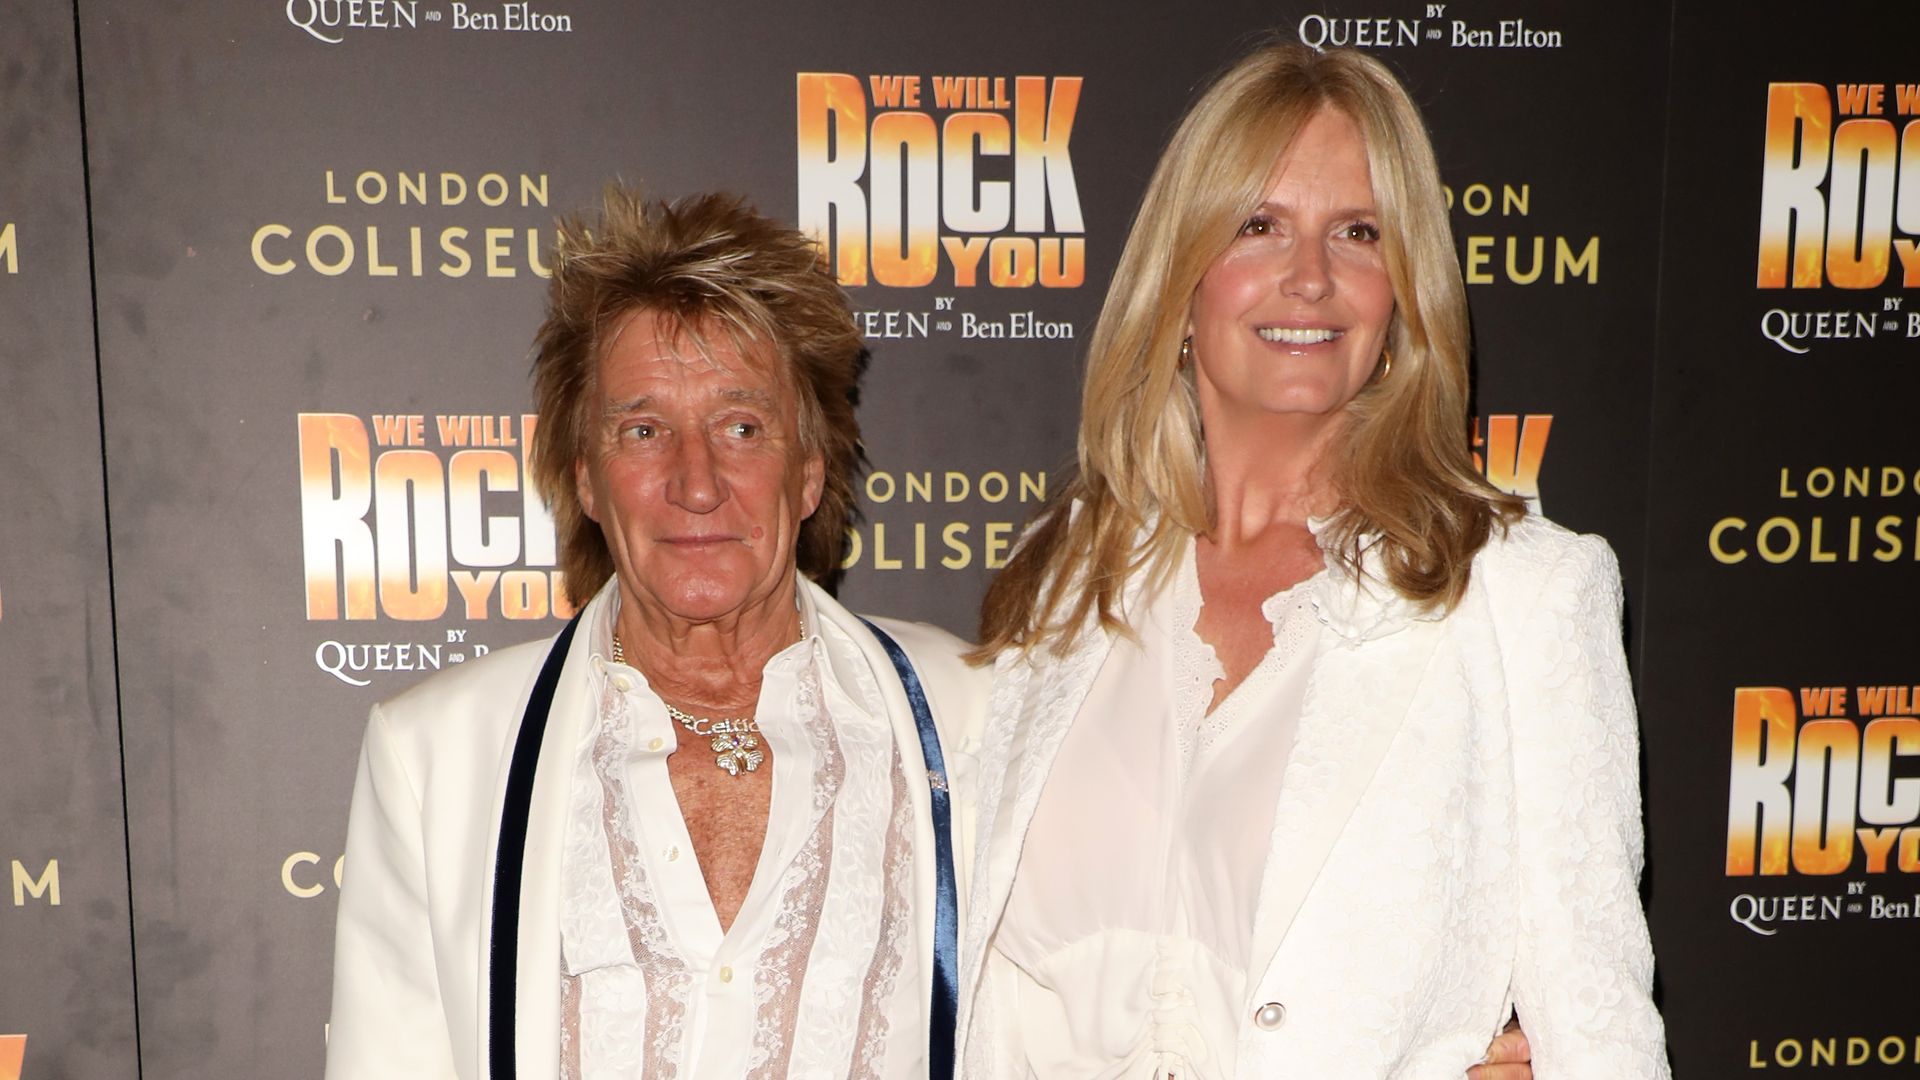 Rod Stewart and Penny Lancaster at an event